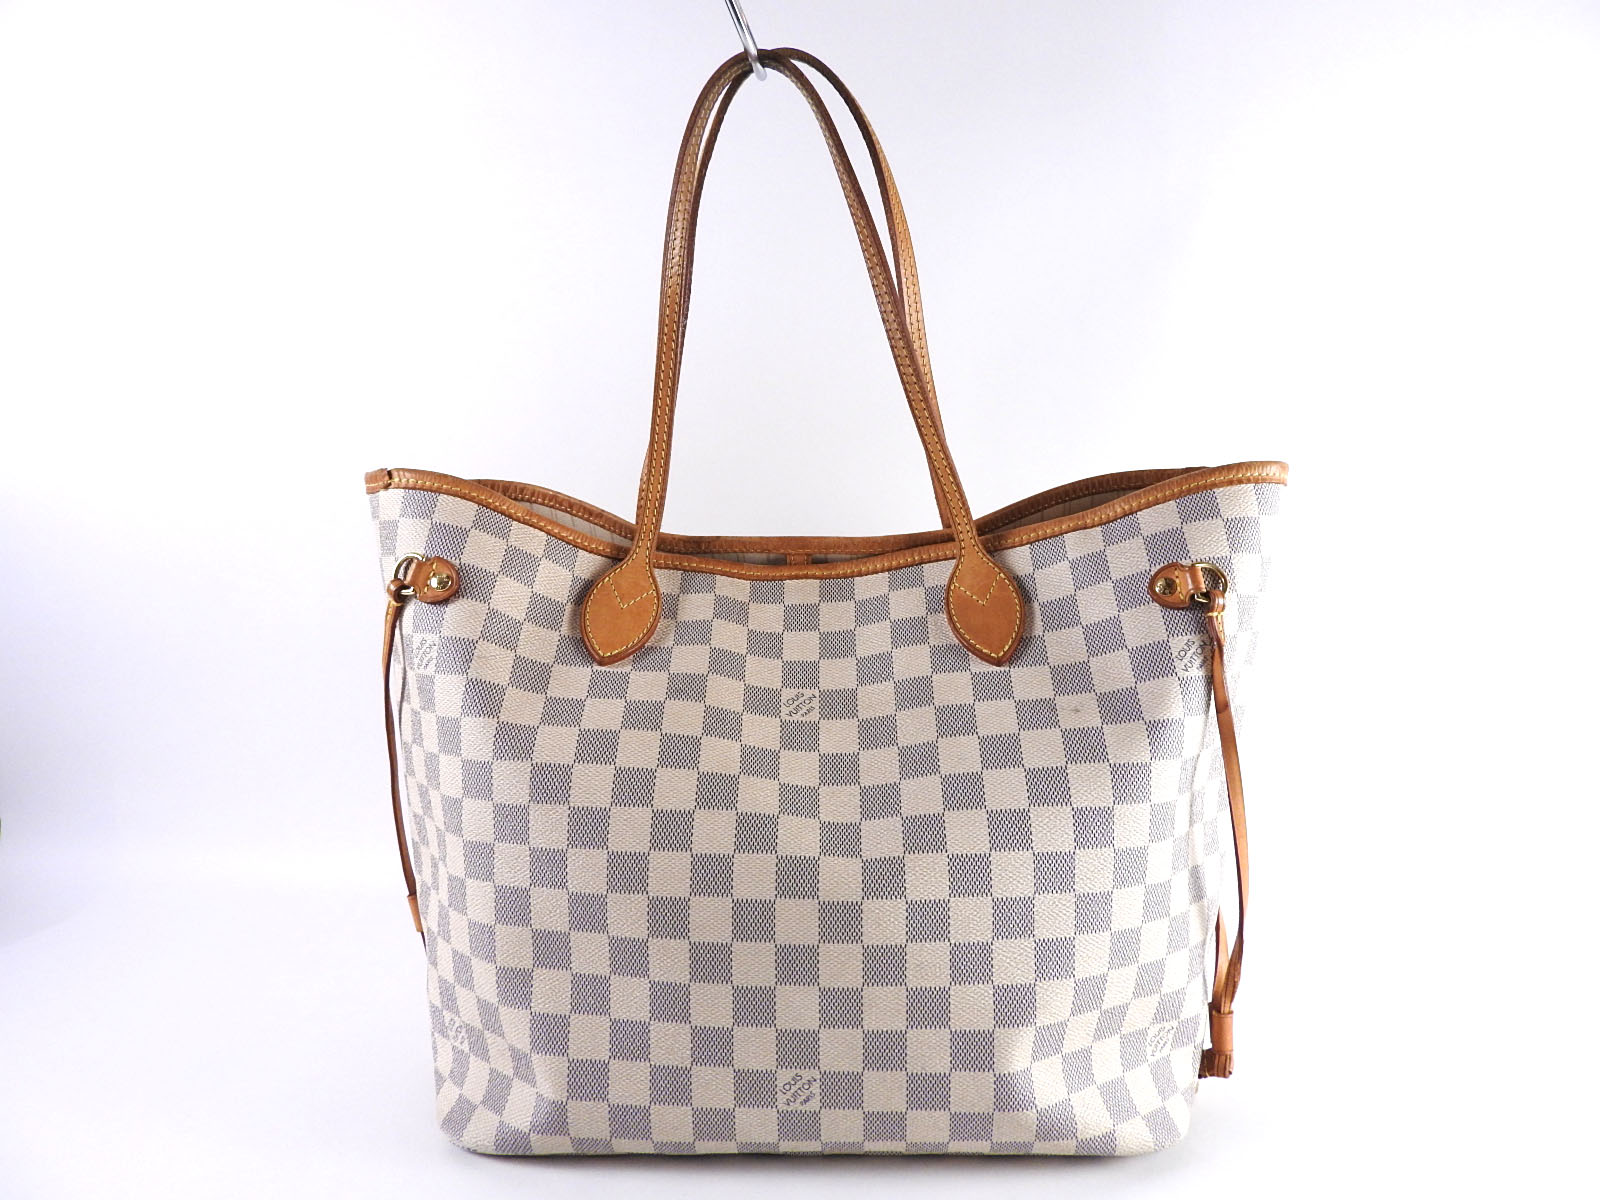 Louis Vuitton Neverfull Mm Strap Drop | Confederated Tribes of the Umatilla Indian Reservation